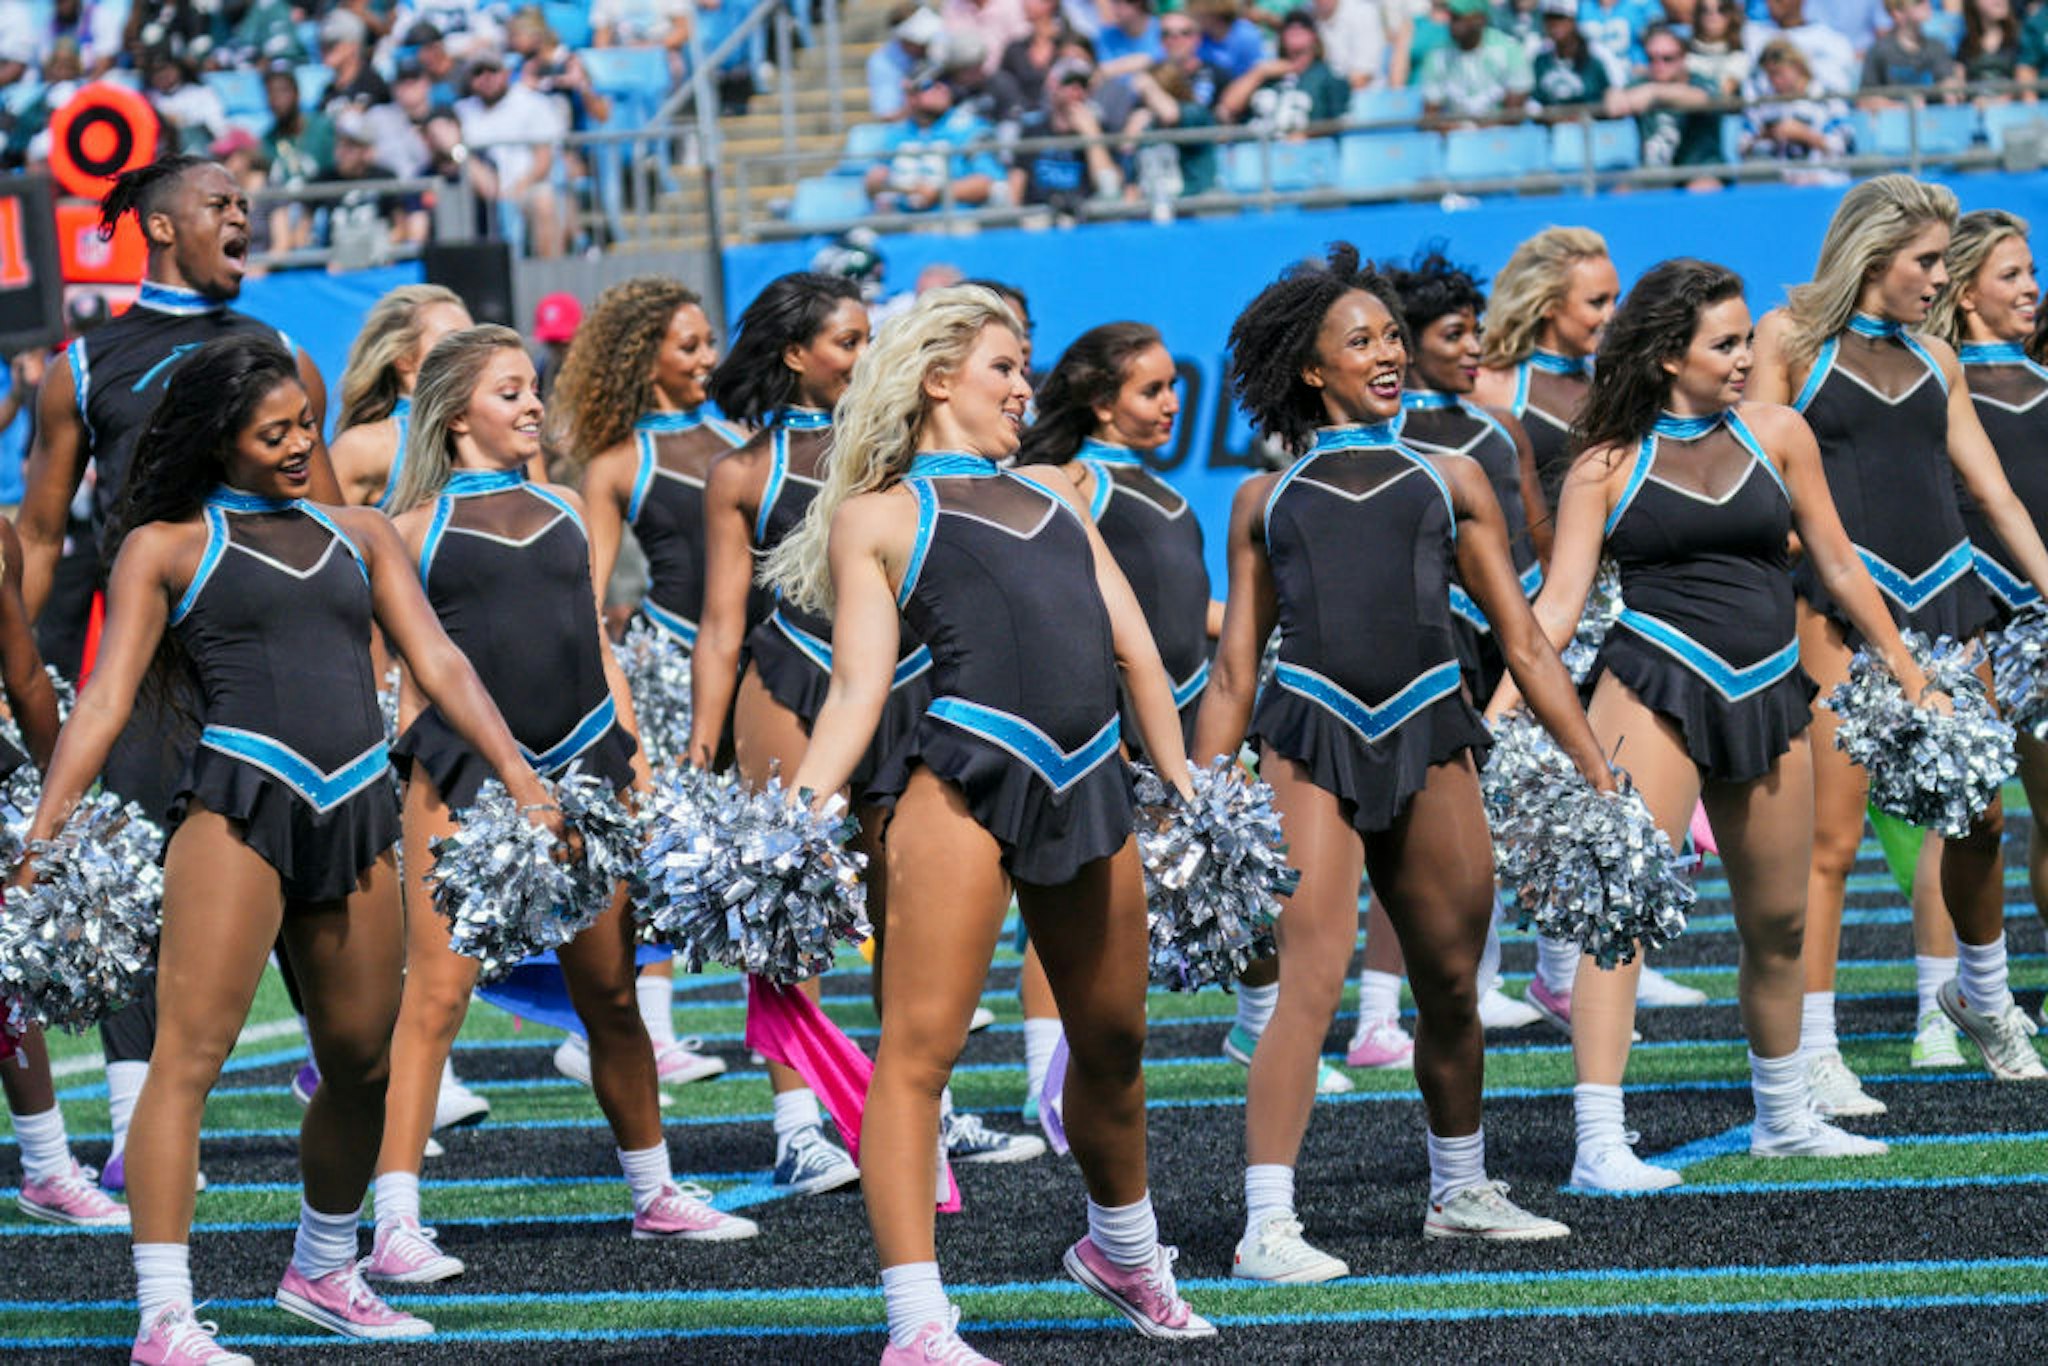 Carolina Panthers cheerleaders perform during the game between the Carolina Panthers and the Philadelphia Eagles on October 10, 2021 at Bank of America Stadium in Charlotte, NC.